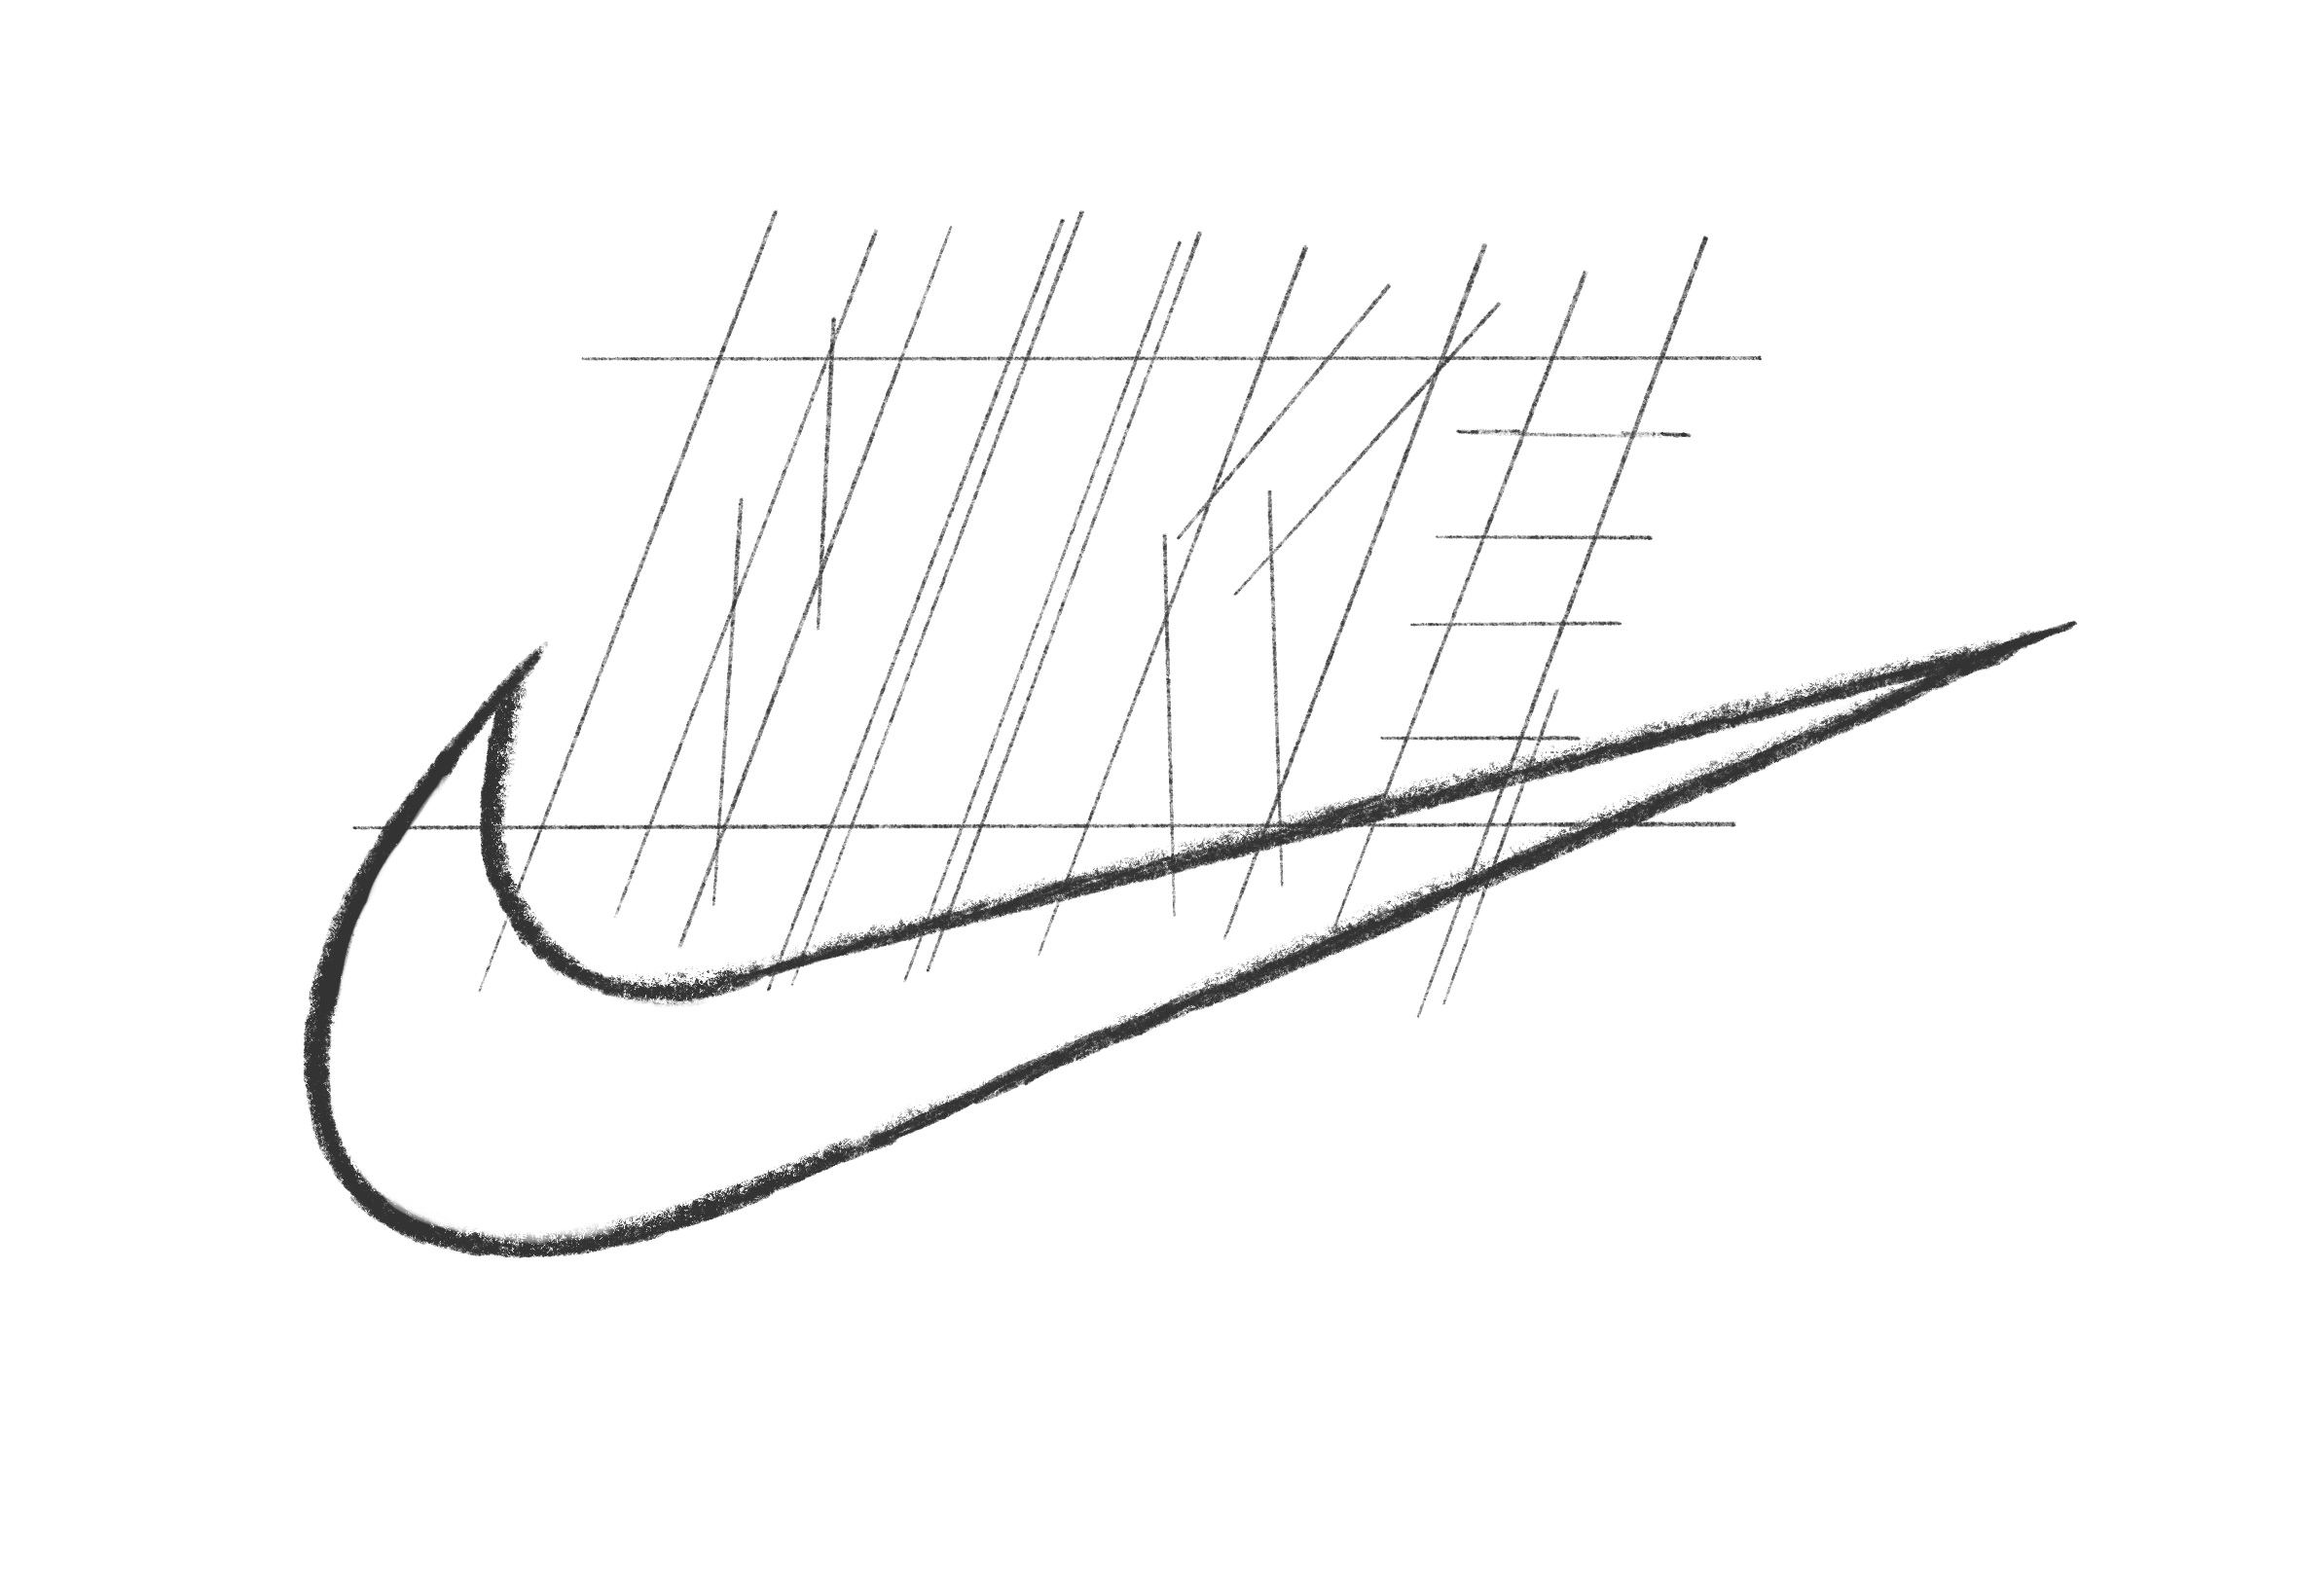 Step 6 of drawing the Nike logo: Draw the other lines of the 'Nike'-letters